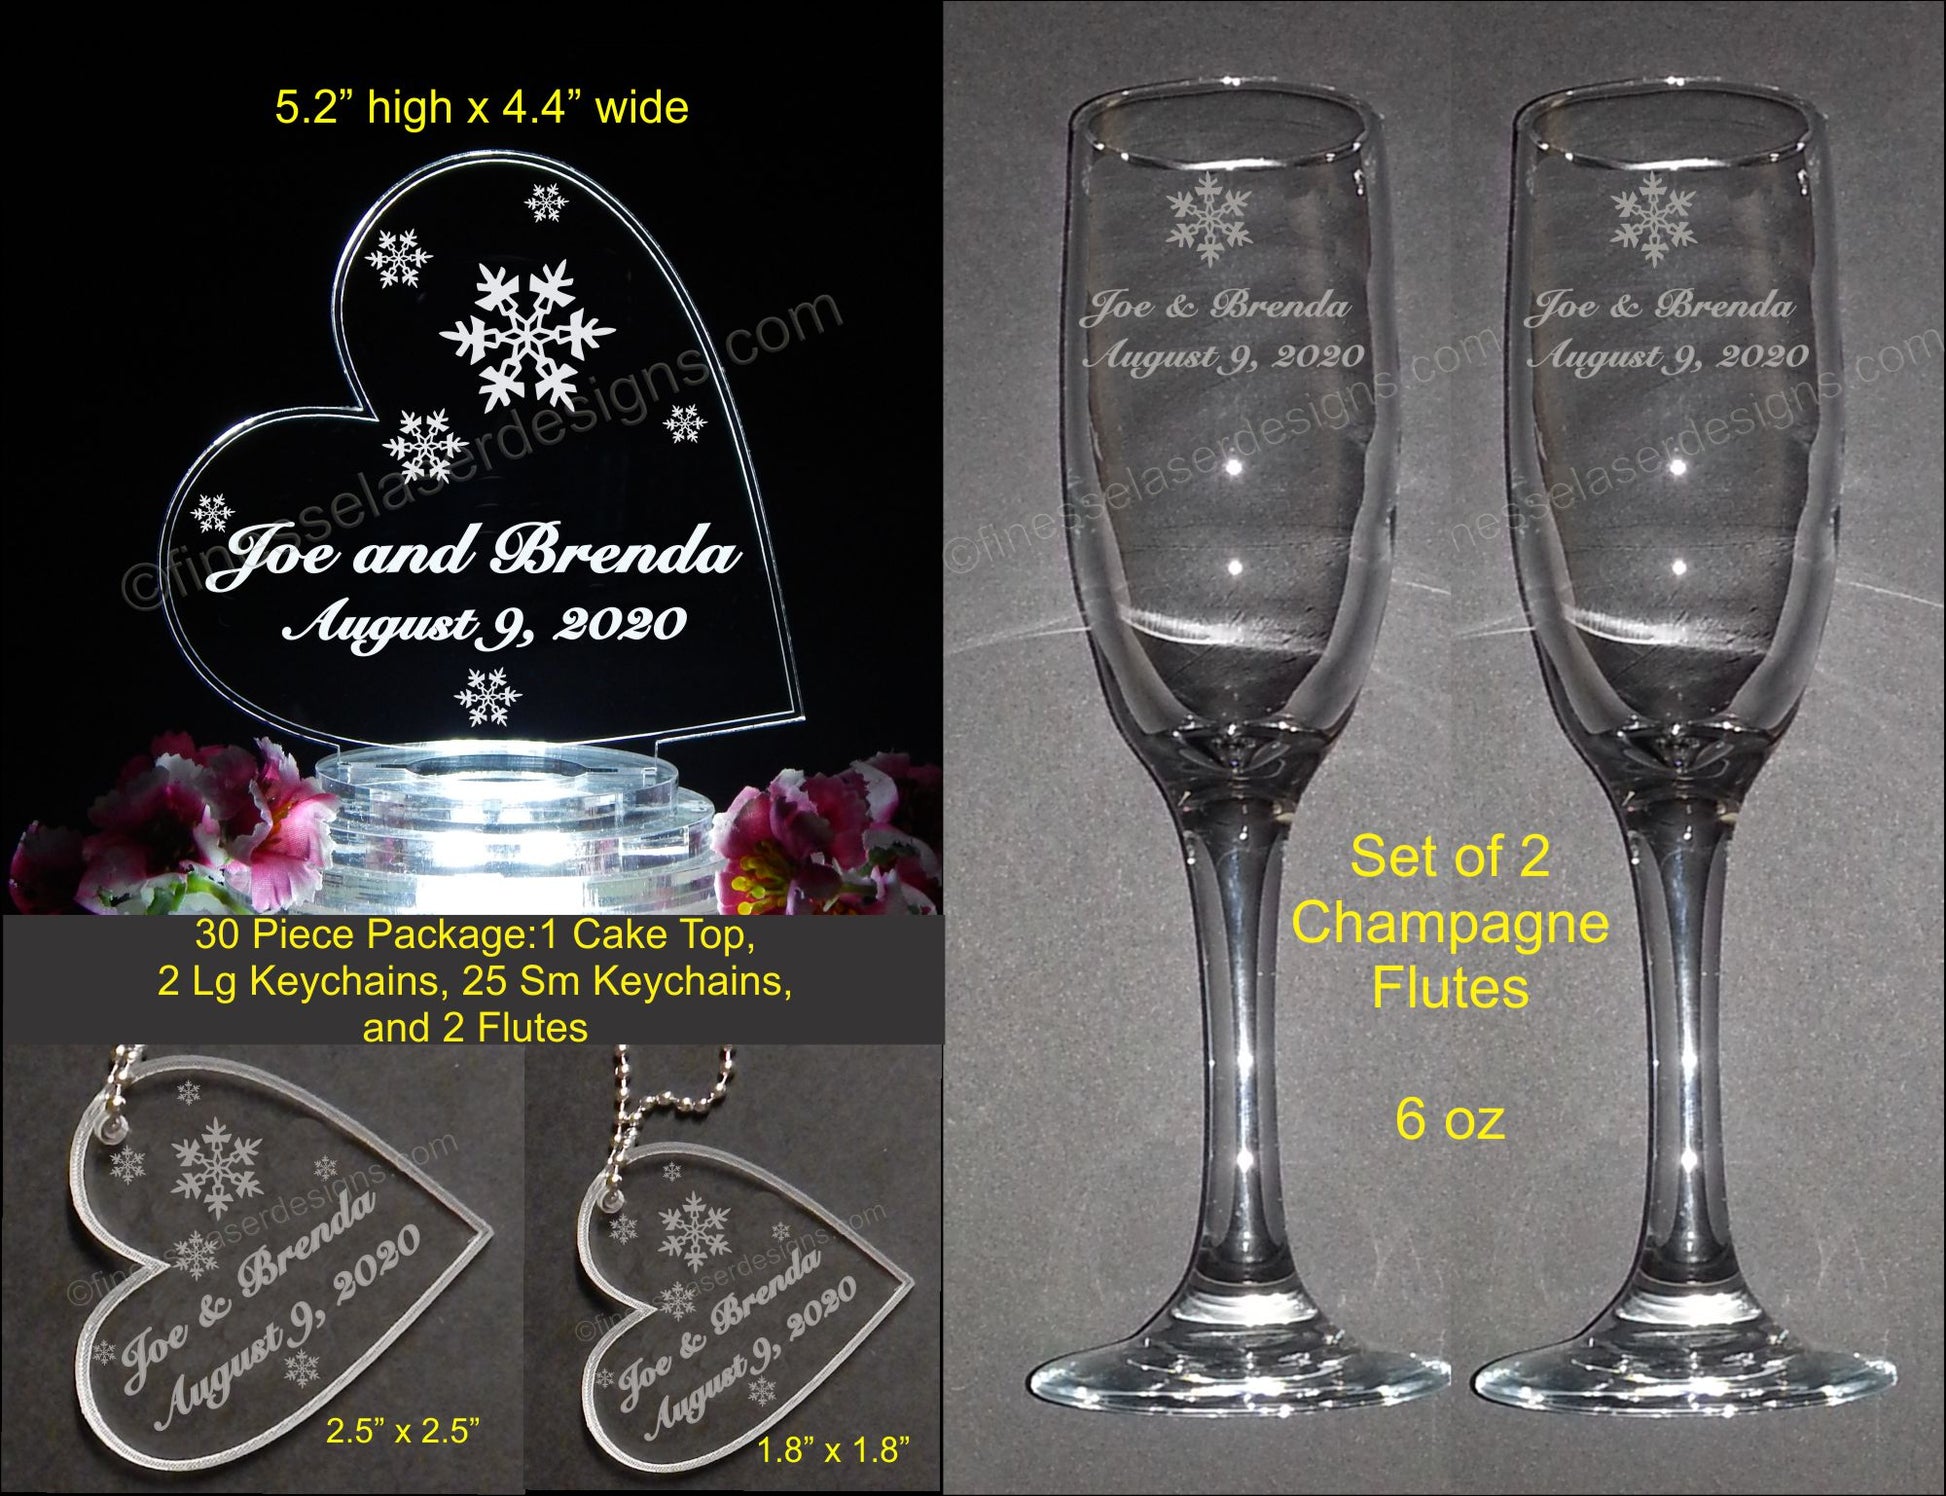 photos showing a side heart shaped acrylic cake topper decorated with snowflakes, two sizes of matching heart shaped keychains, and a set of champagne flutes engraved with snowflake names and date